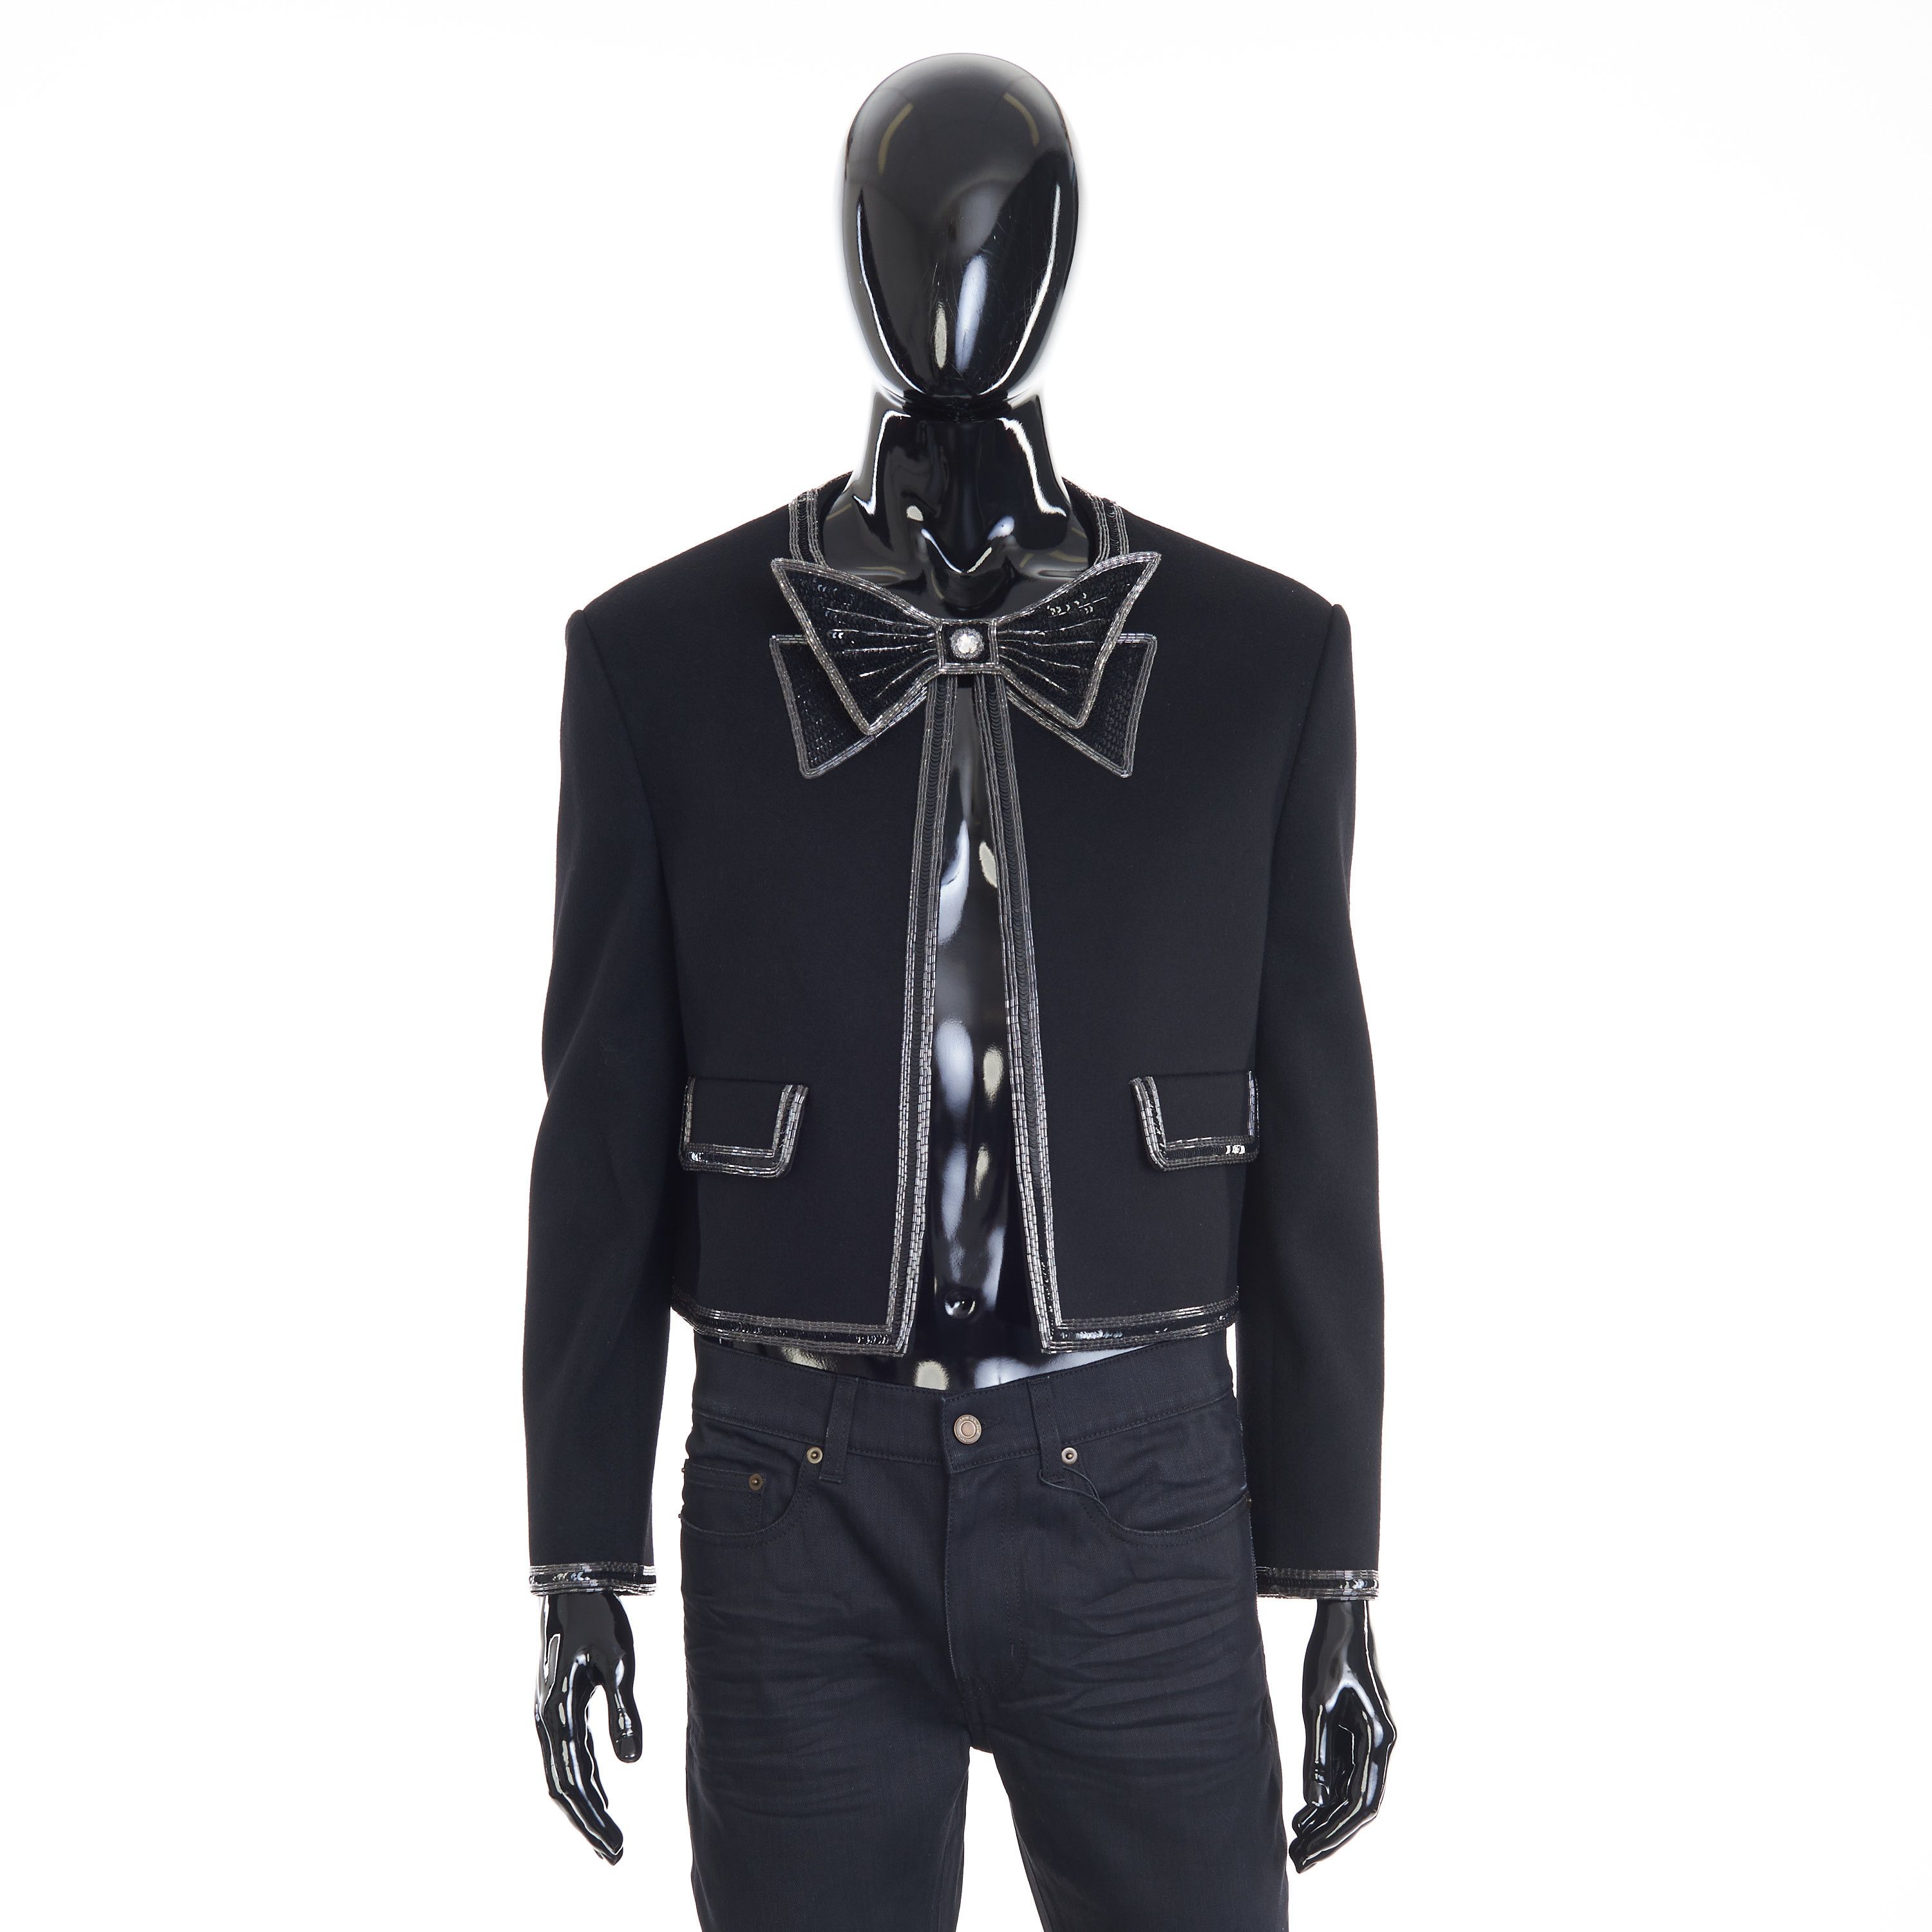 image of Celine Bow-Tie Cardigan With Pearl And Sequin Embroidery in Black, Men's (Size Small)